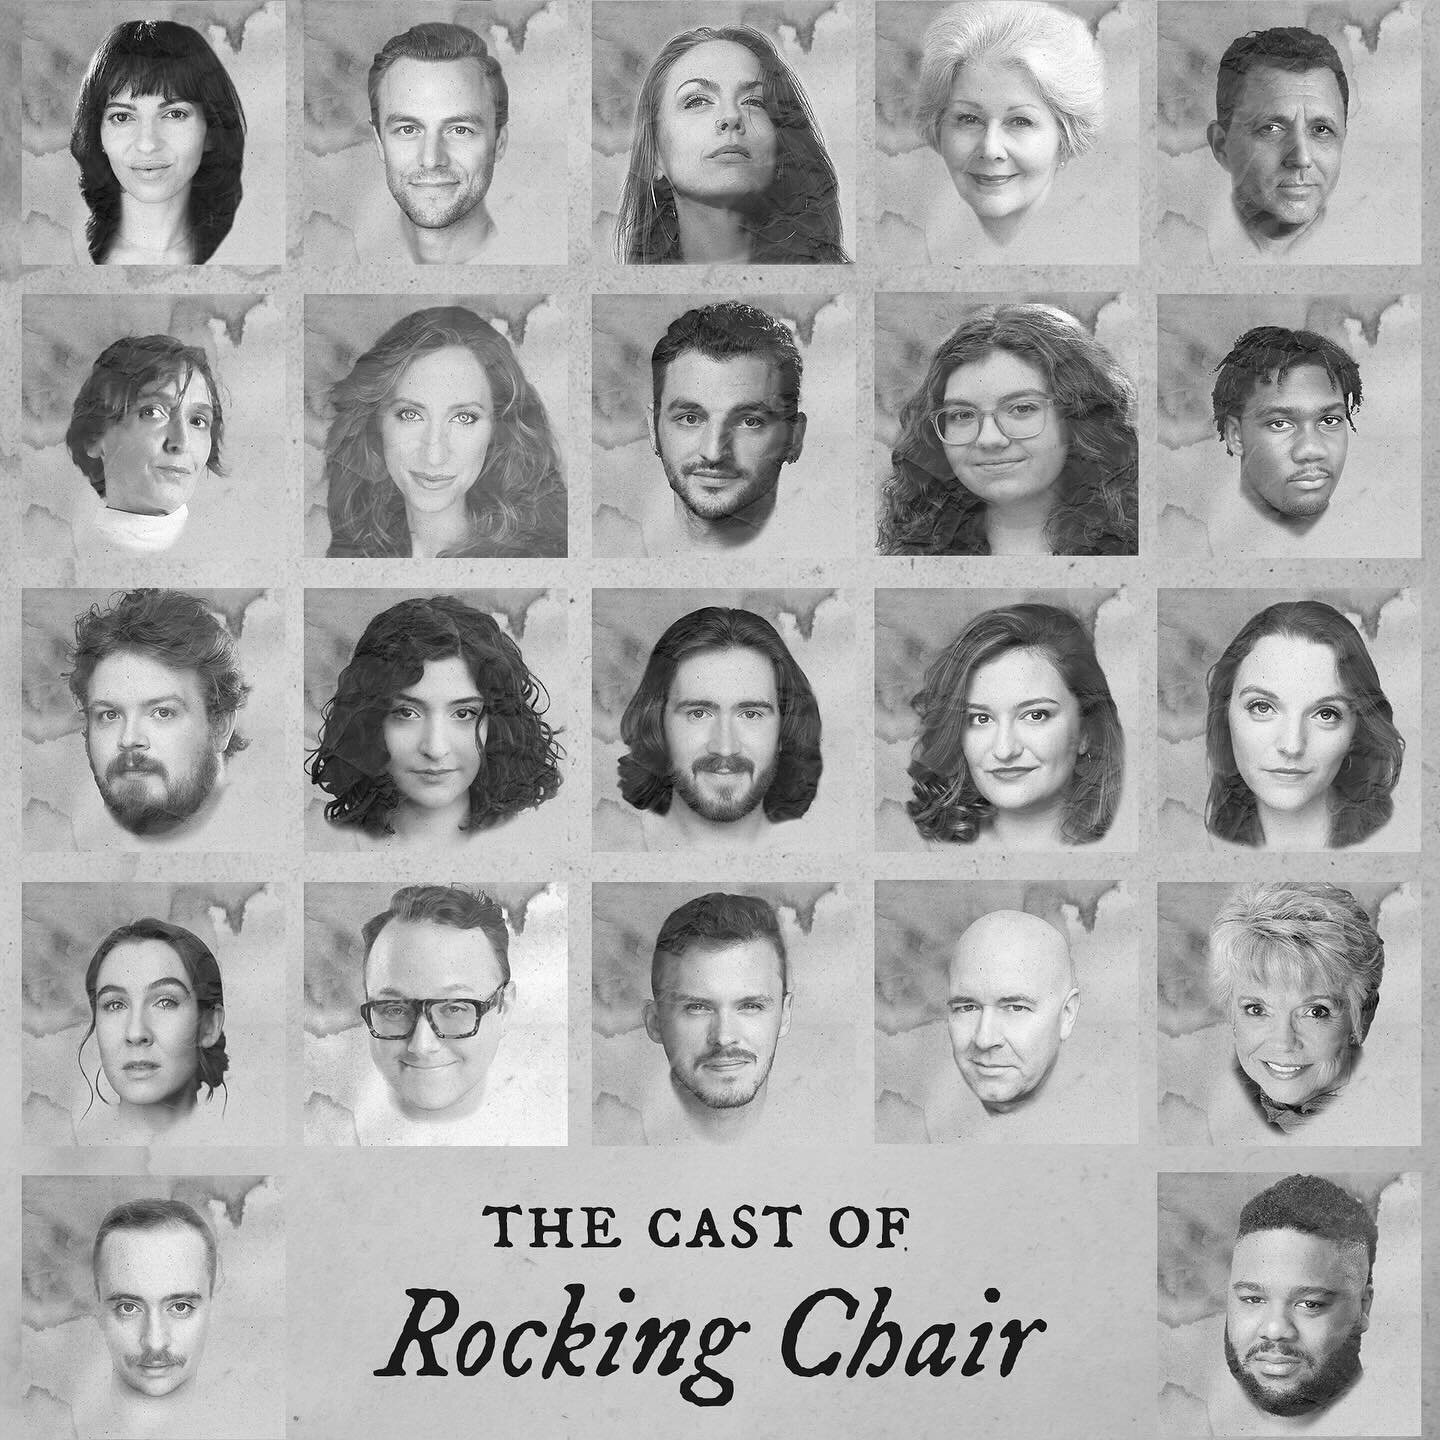 Allow us to introduce the cast of Rocking Chair! 👻🎻 

We had the absolute honor of collaborating with these talented, wonderful humans to bring this folk musical podcast to life. They invested so much time, effort, and skill into this project. Hour